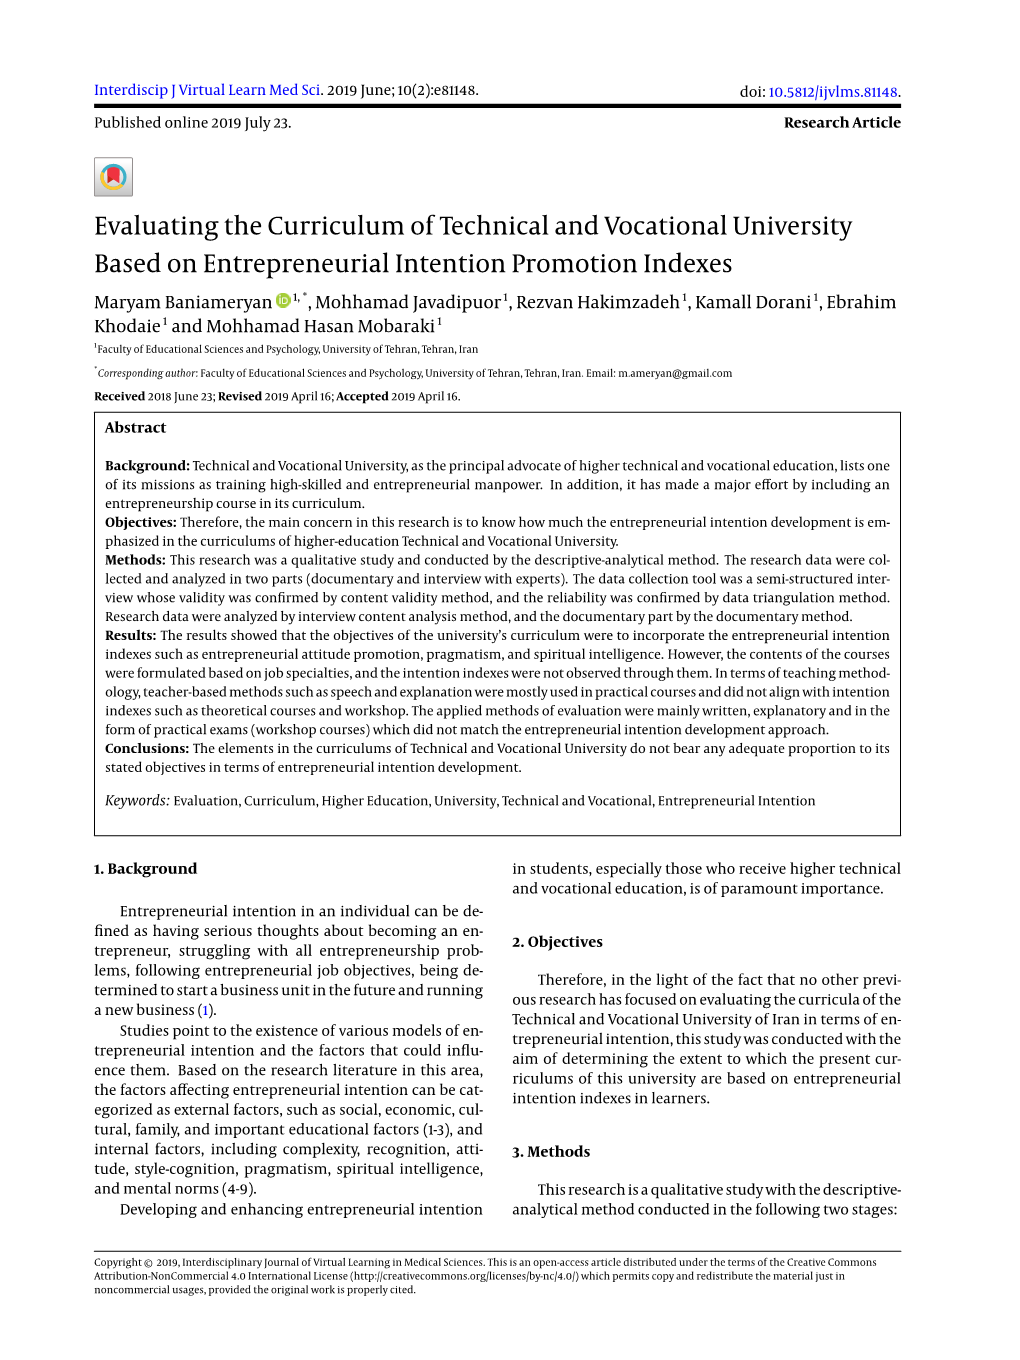 Evaluating the Curriculum of Technical and Vocational University Based on Entrepreneurial Intention Promotion Indexes